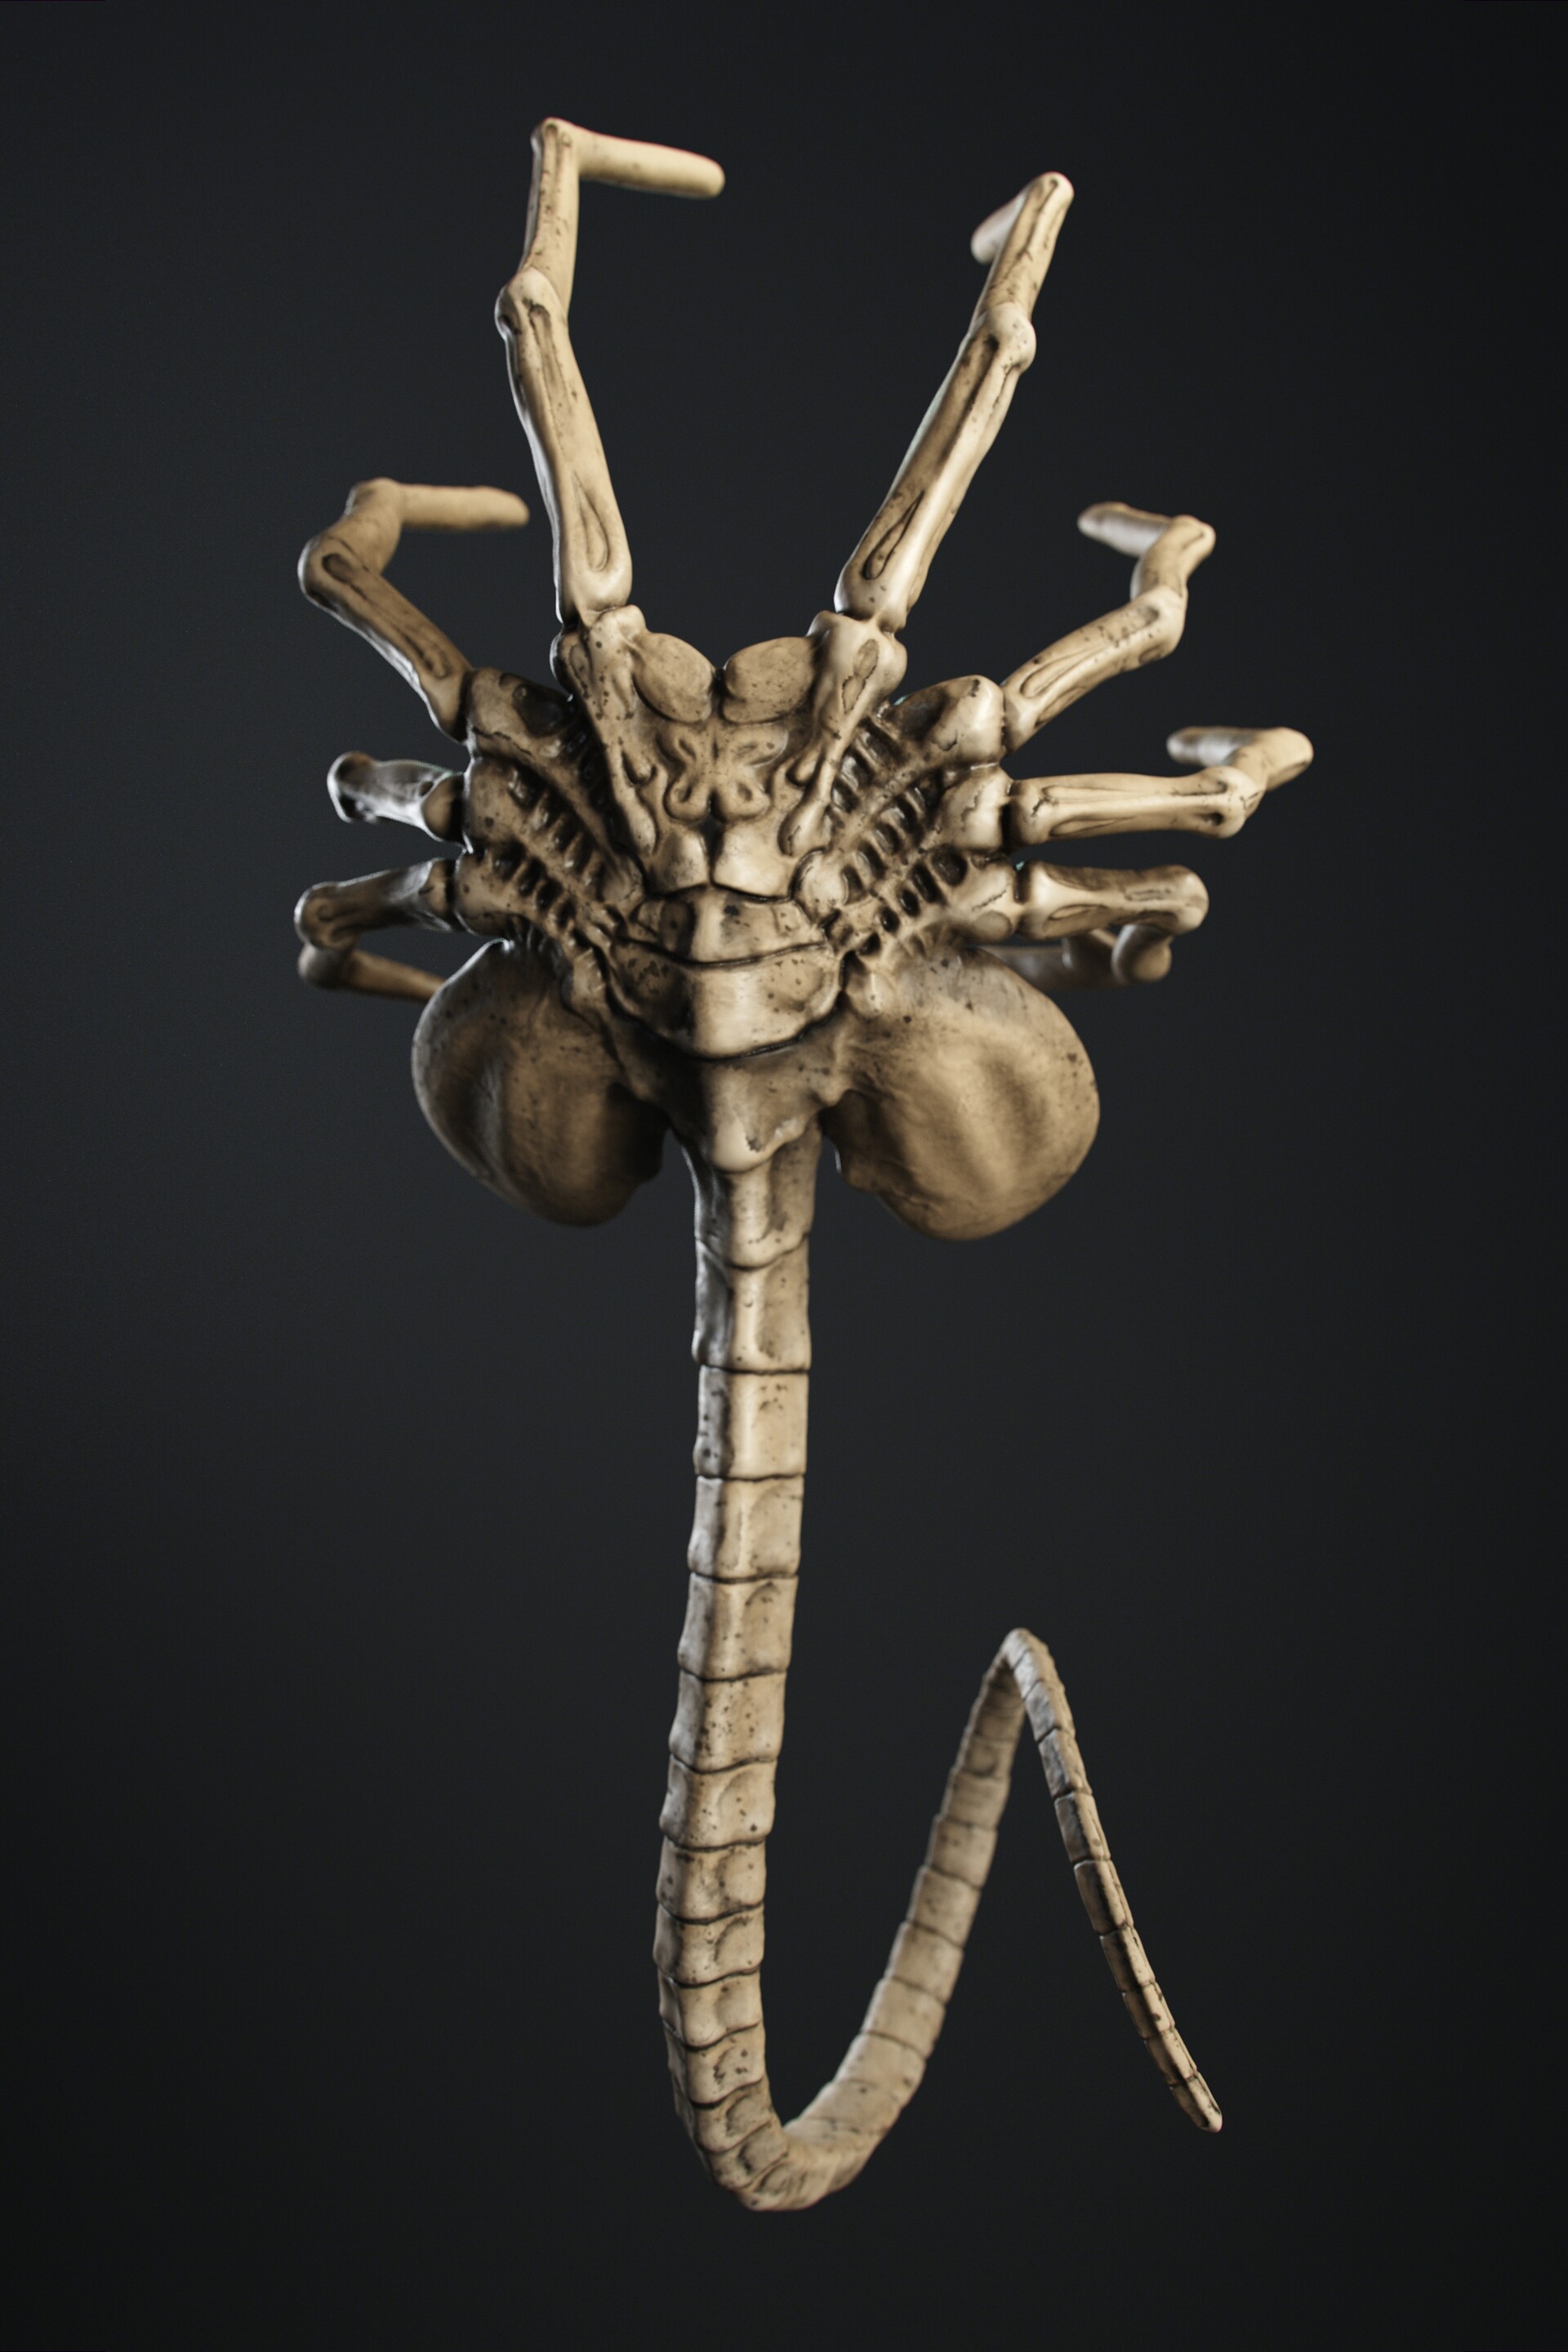 The facehugger.